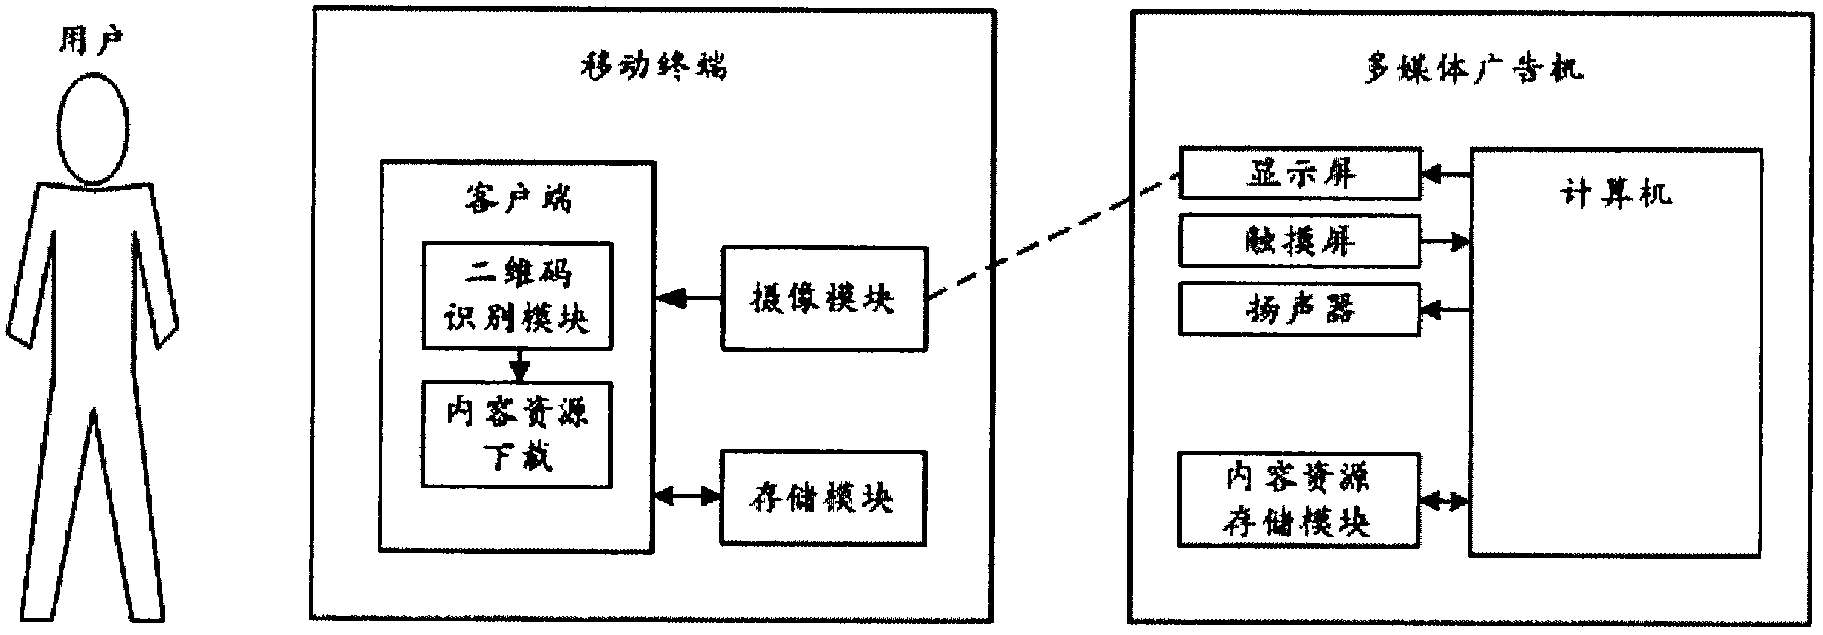 Promotion system and method of mobile internet content resources